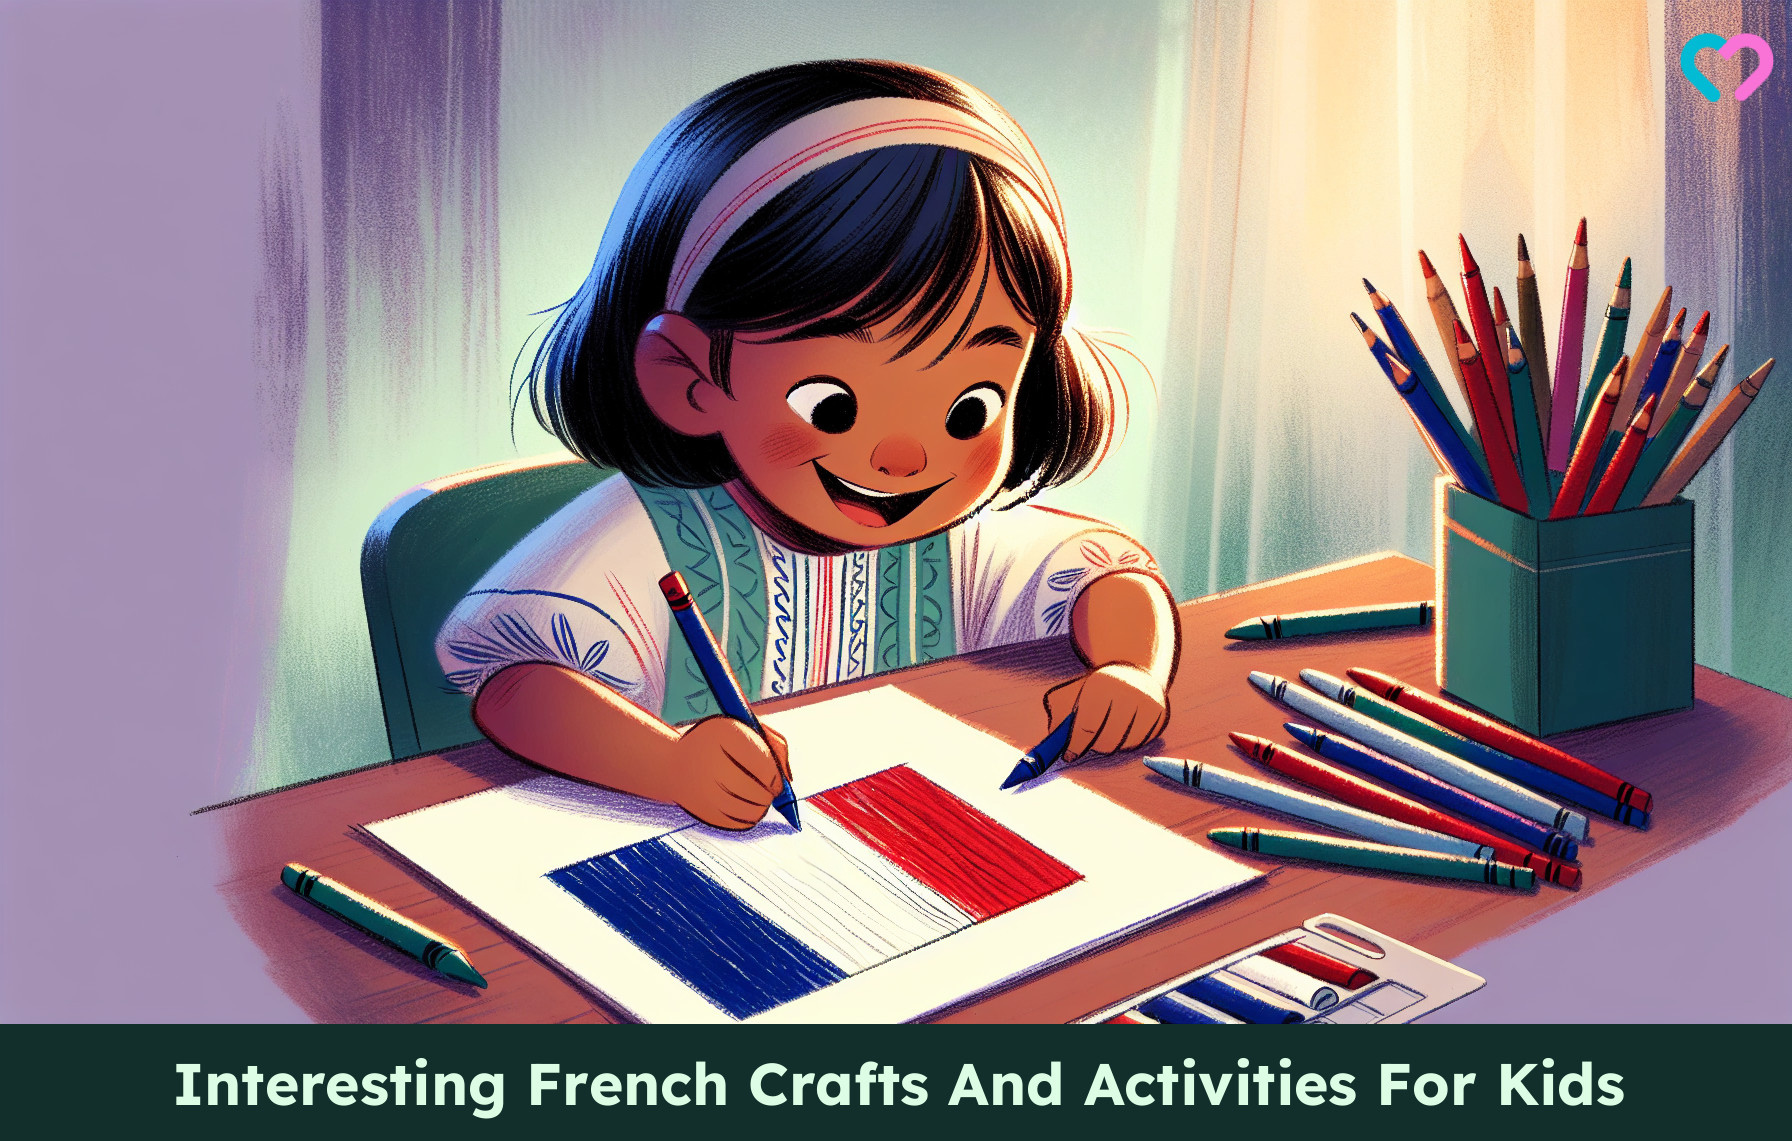 French Crafts And Activities For Kids_illustration